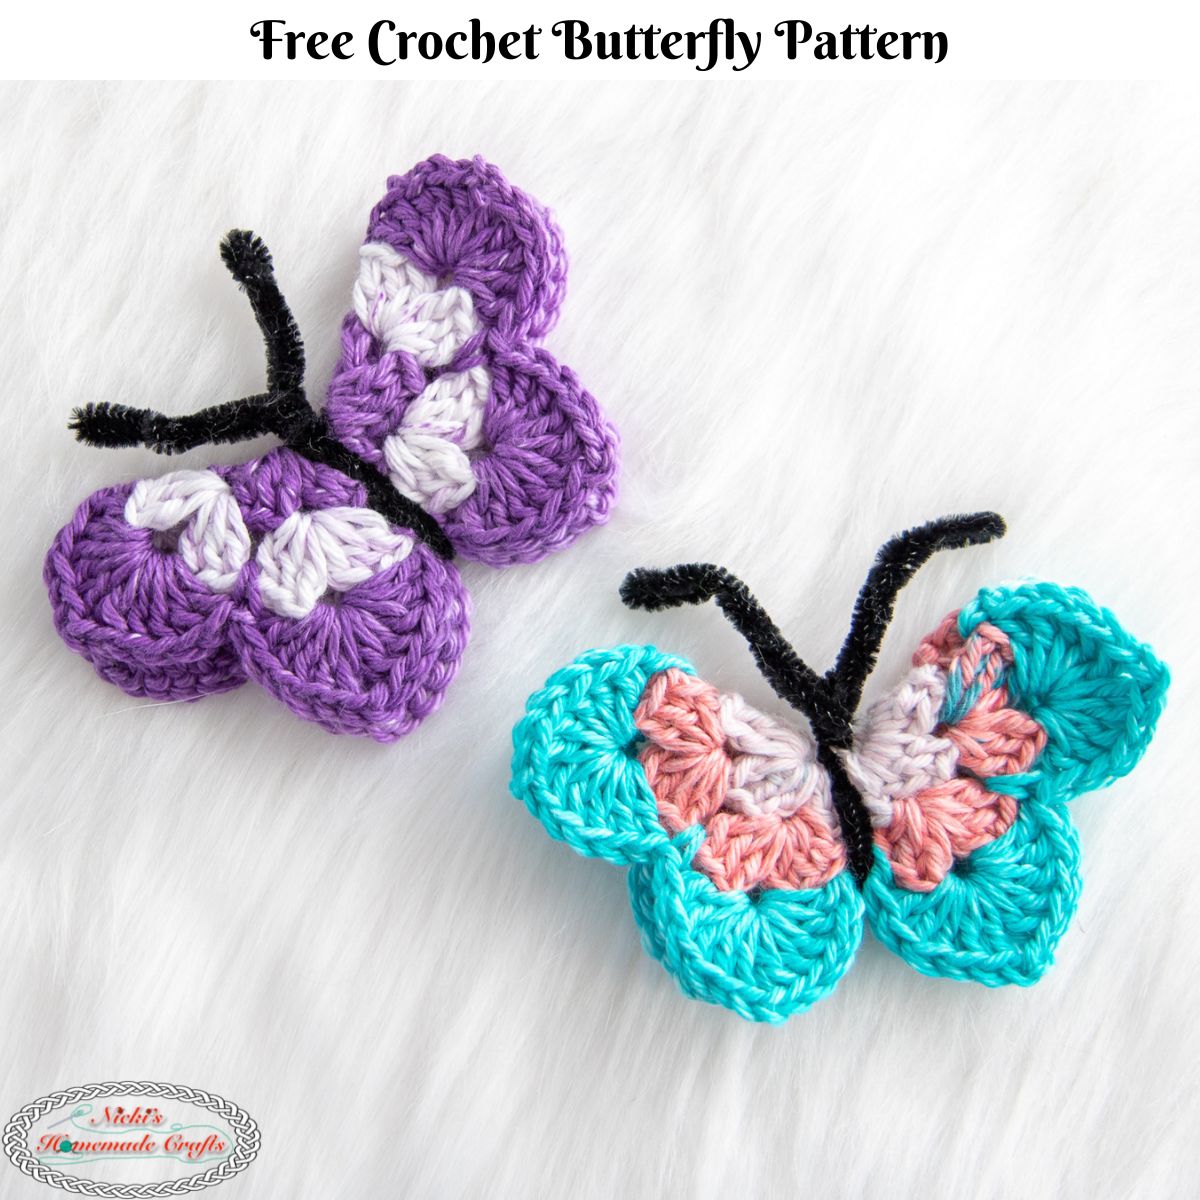 Free Quick Crochet Butterfly Pattern - Nicki's Homemade Crafts